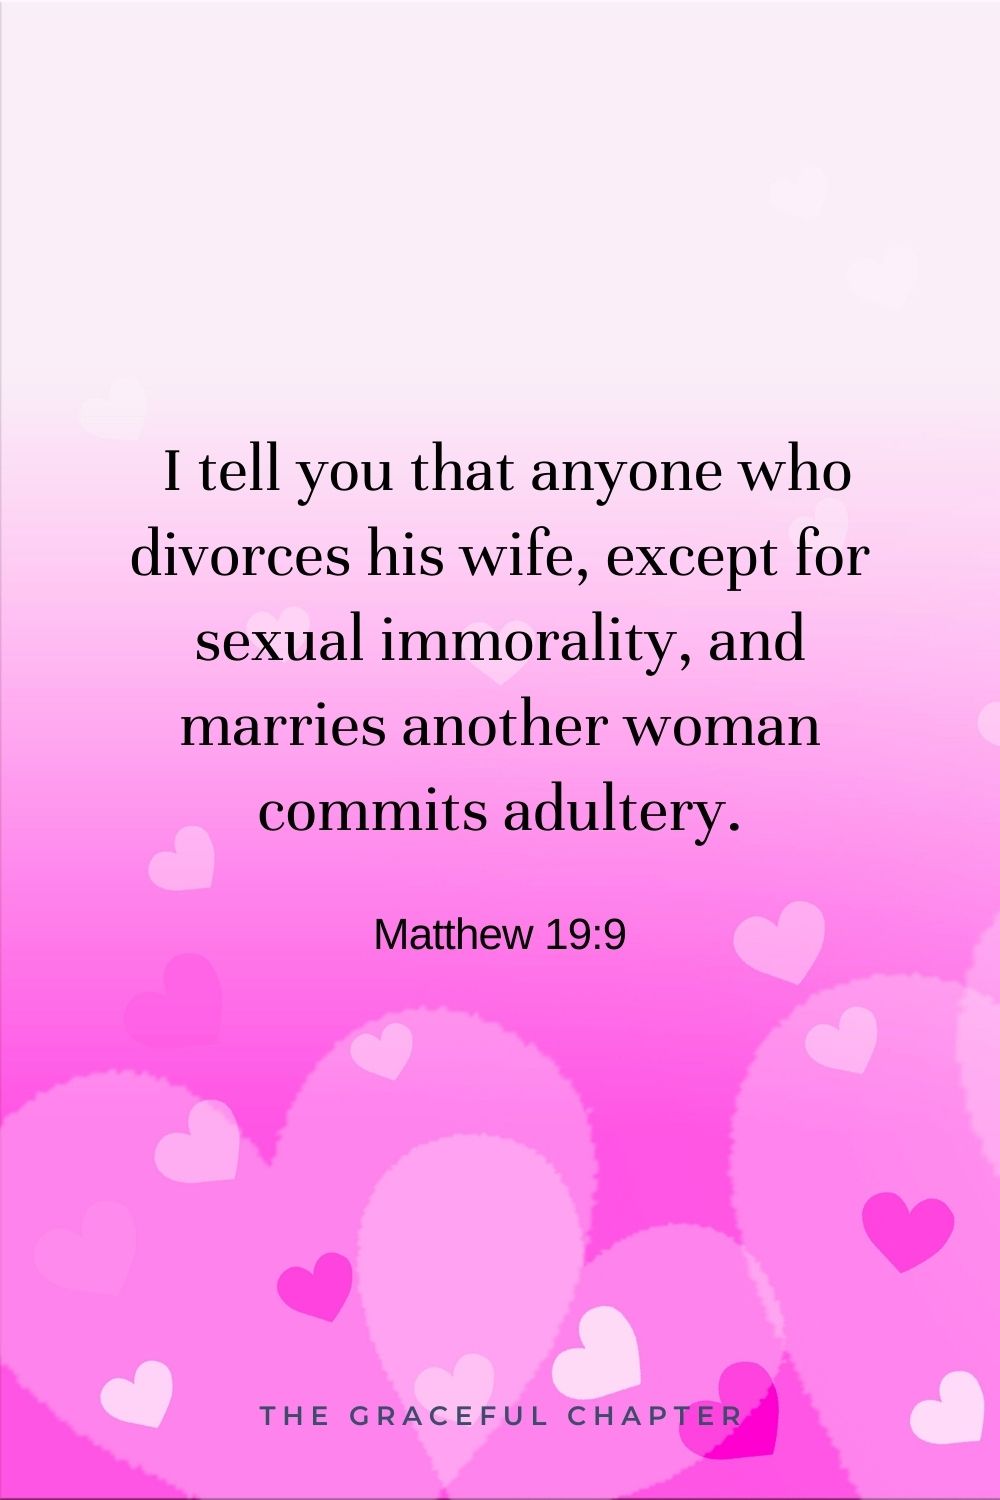 I tell you that anyone who divorces his wife, except for sexual immorality, and marries another woman commits adultery. Matthew 19:9